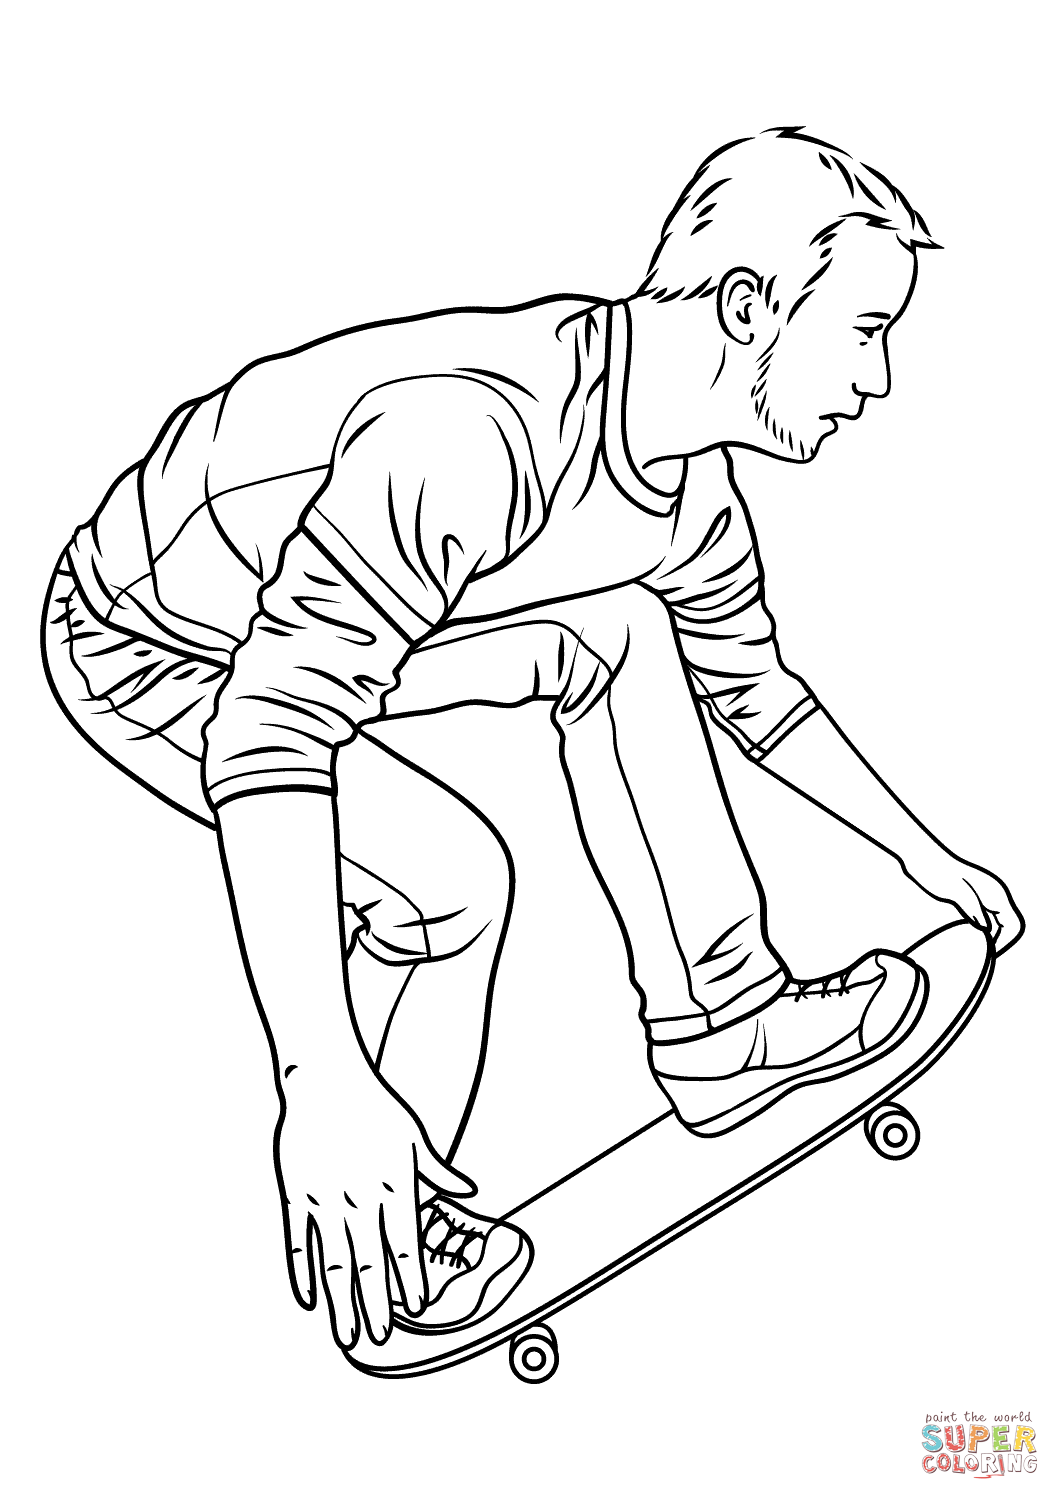 Skateboarding coloring page free printable coloring pages